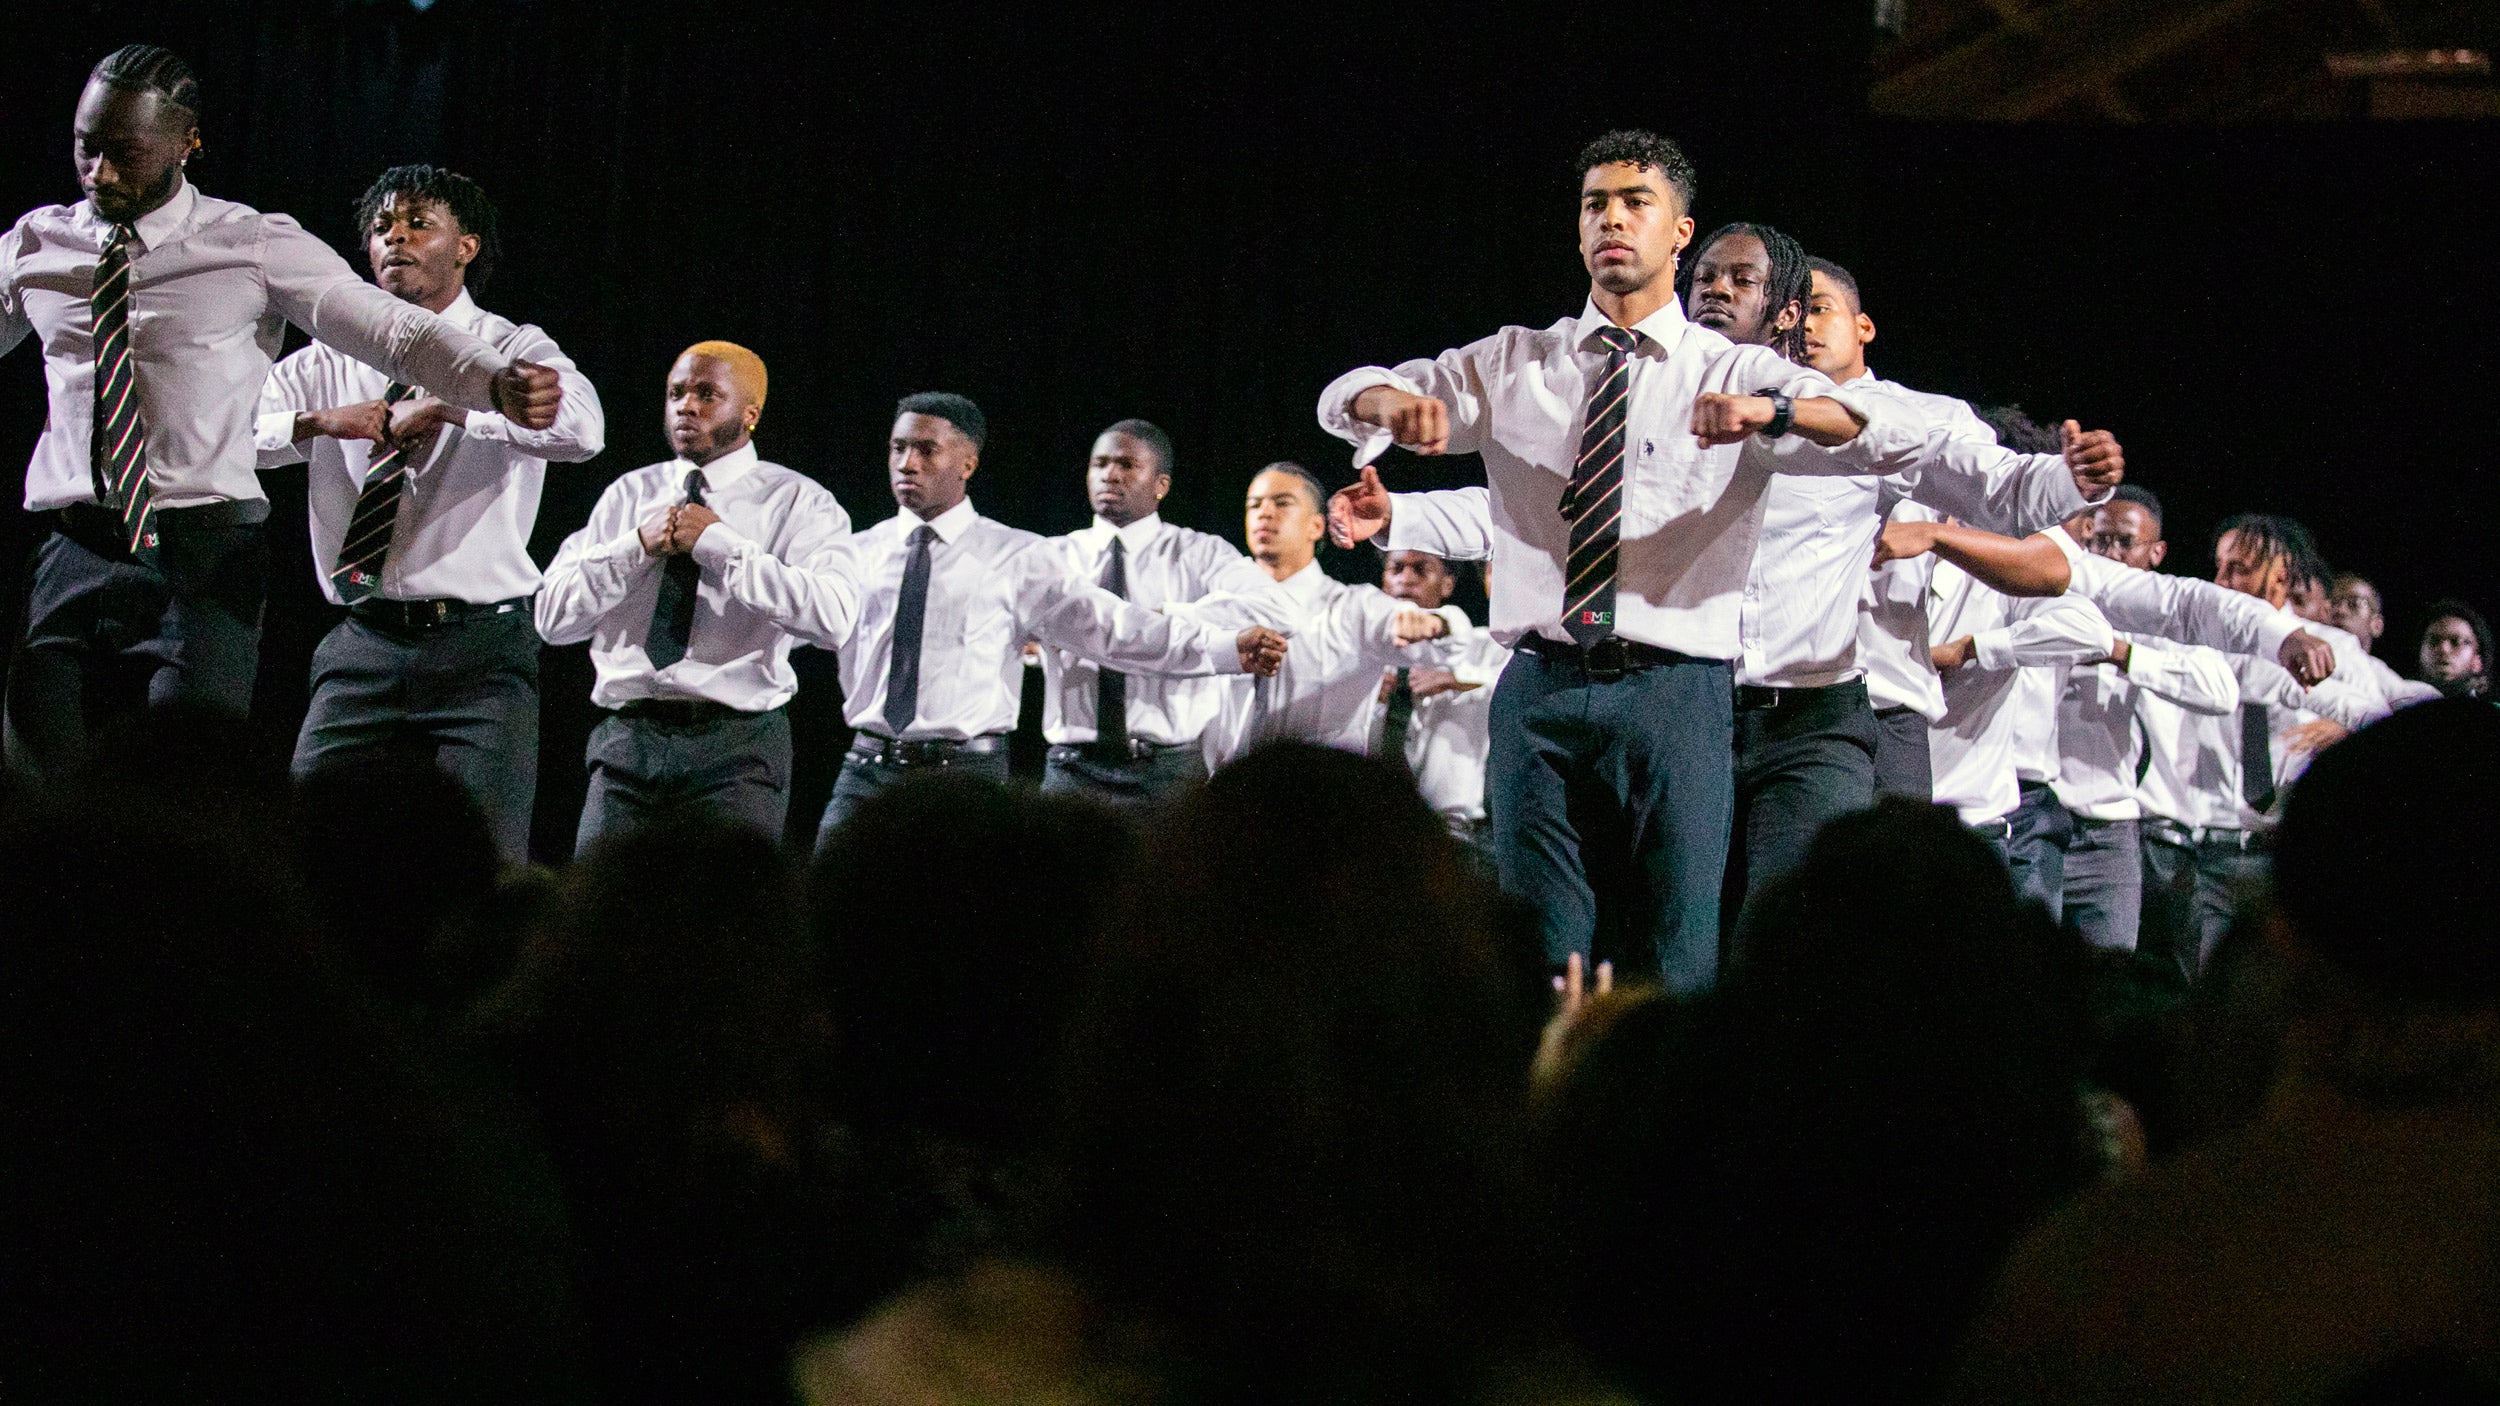 Men in white shirts and ties perform.